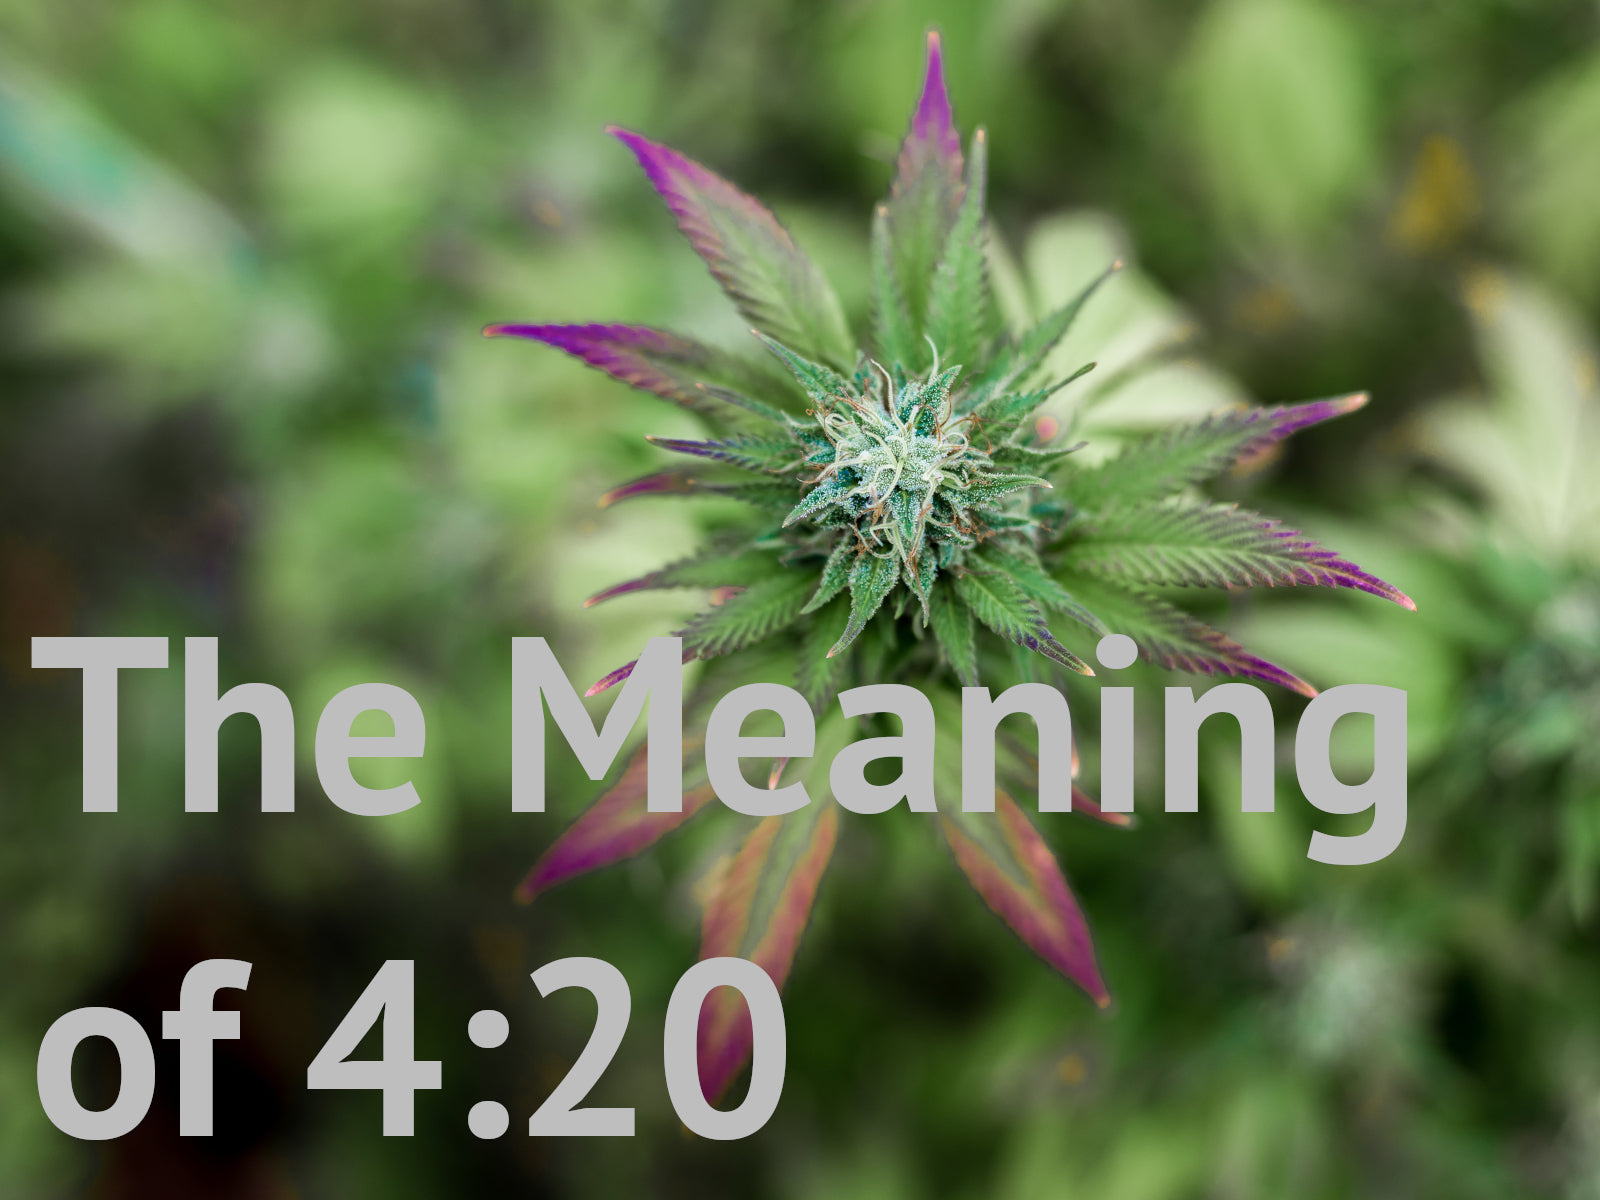 The meaning of 420